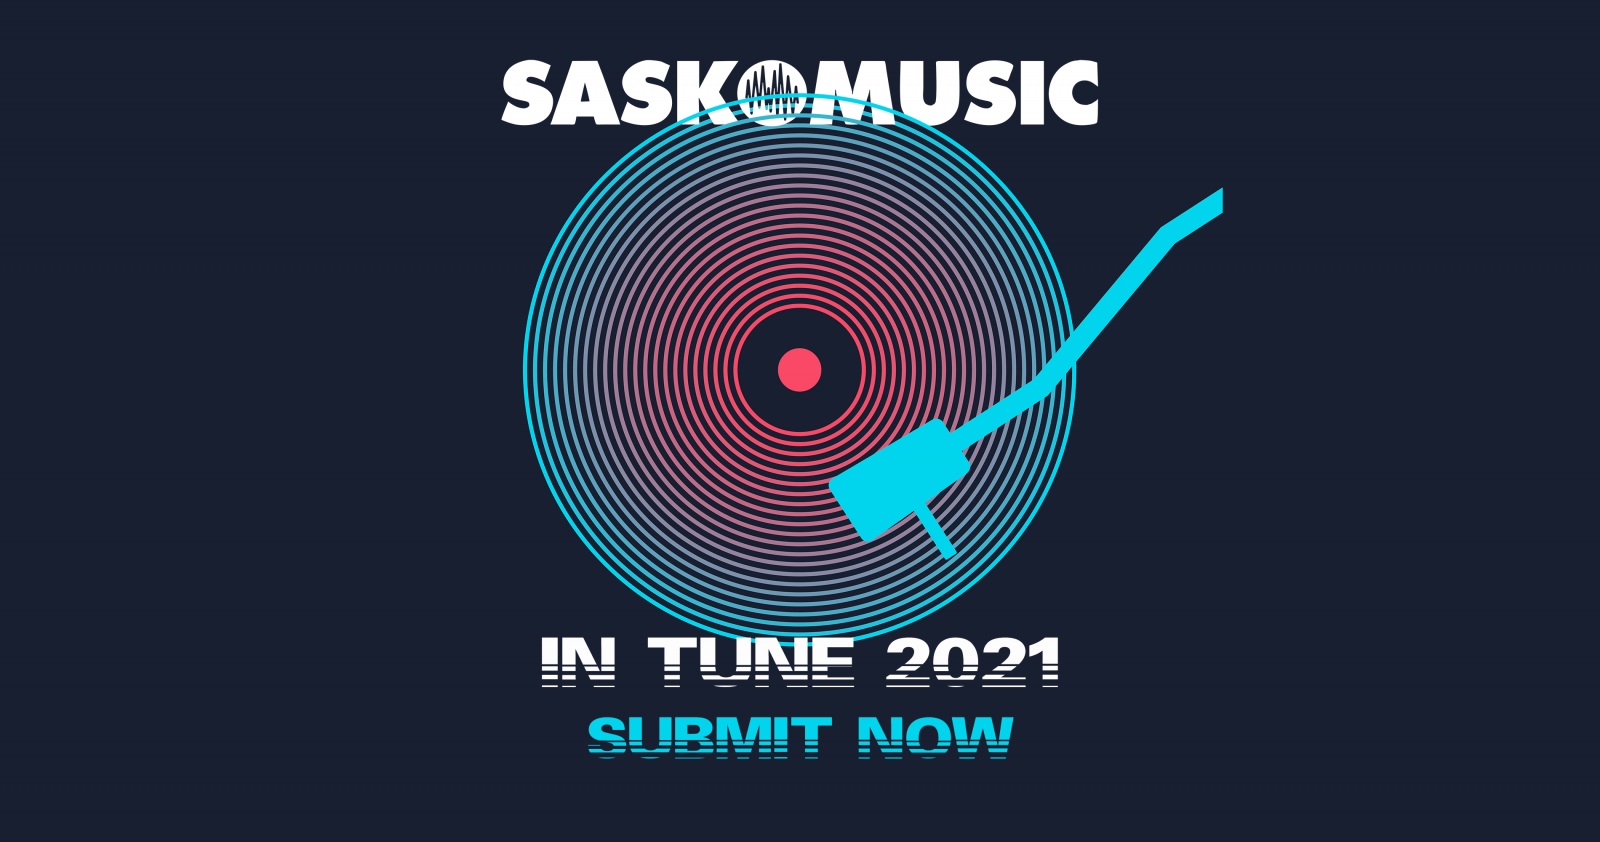 In Tune 2021 submissions